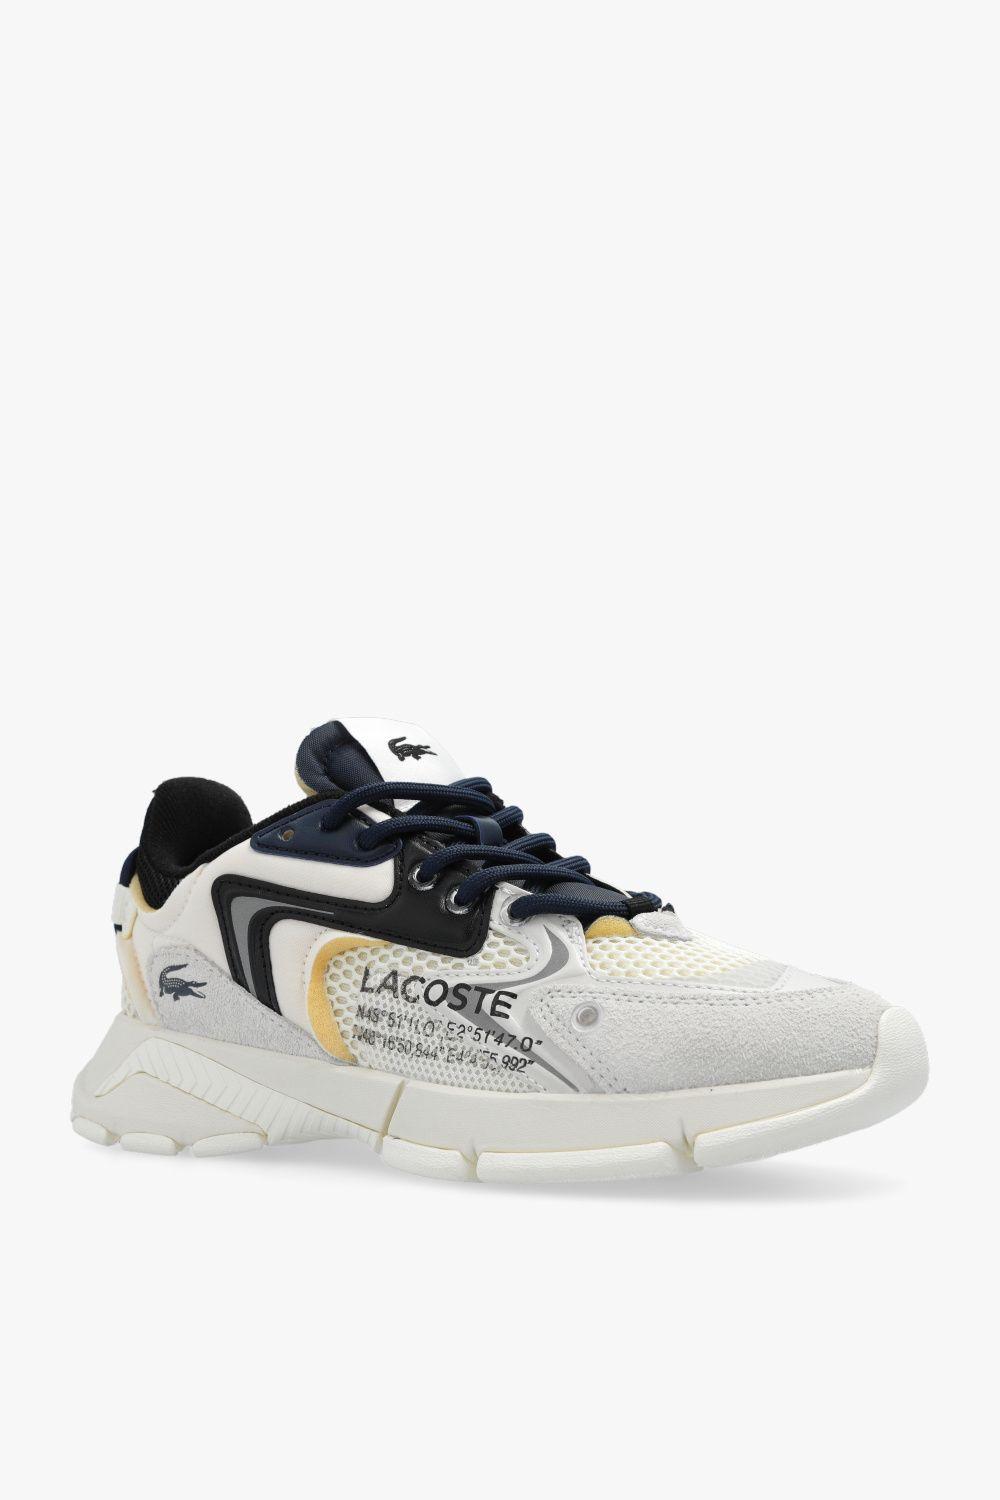 Huelga paquete Viento Lacoste 'l003 Neo' Sneakers in White | Lyst